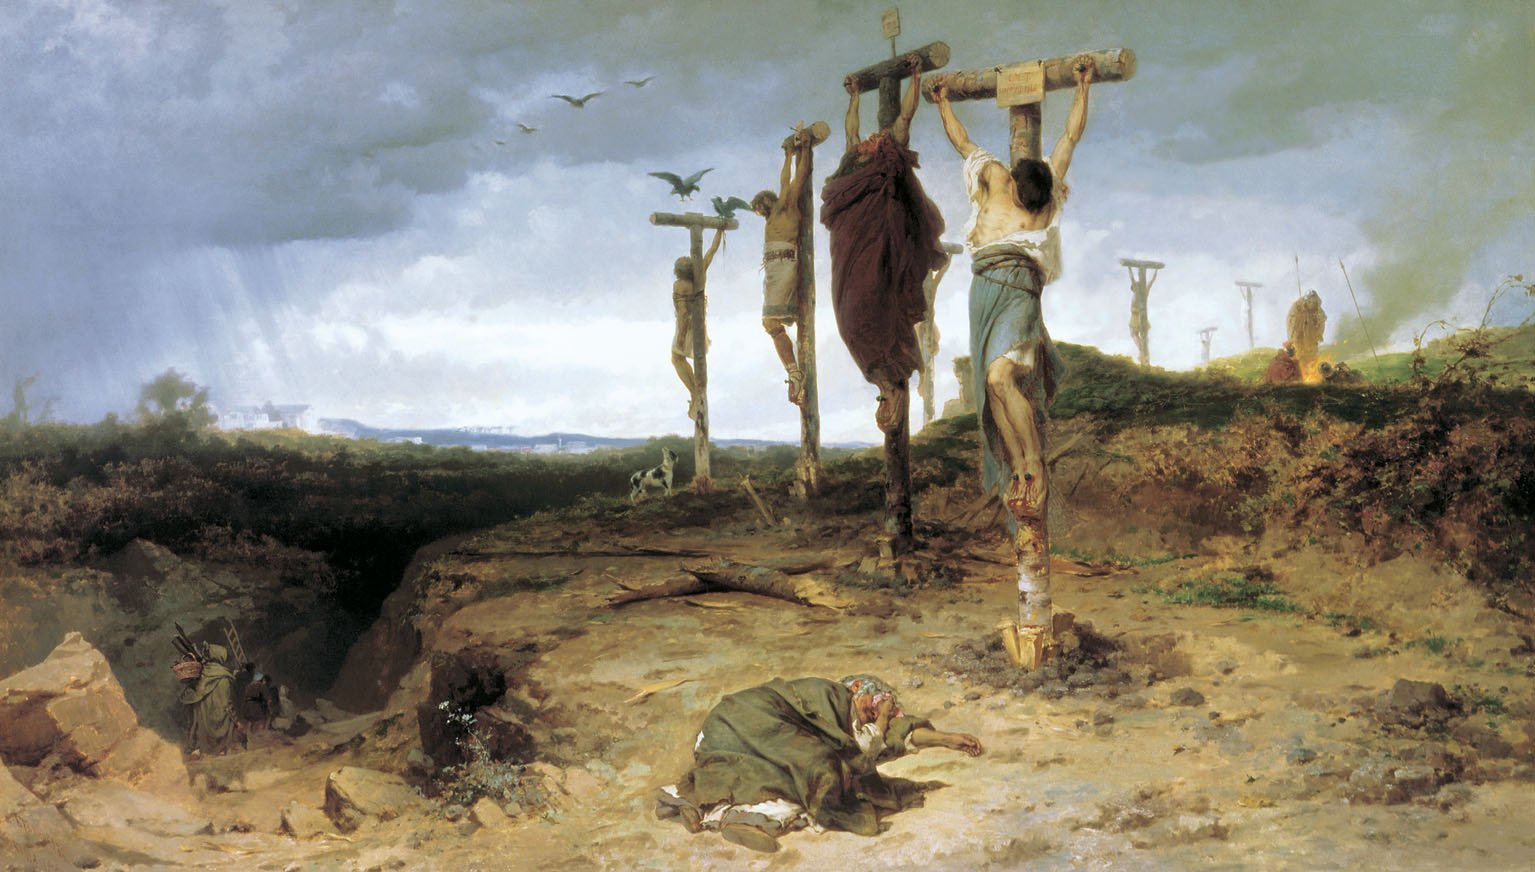 Oil painting of crucified slaves in Ancient Rome